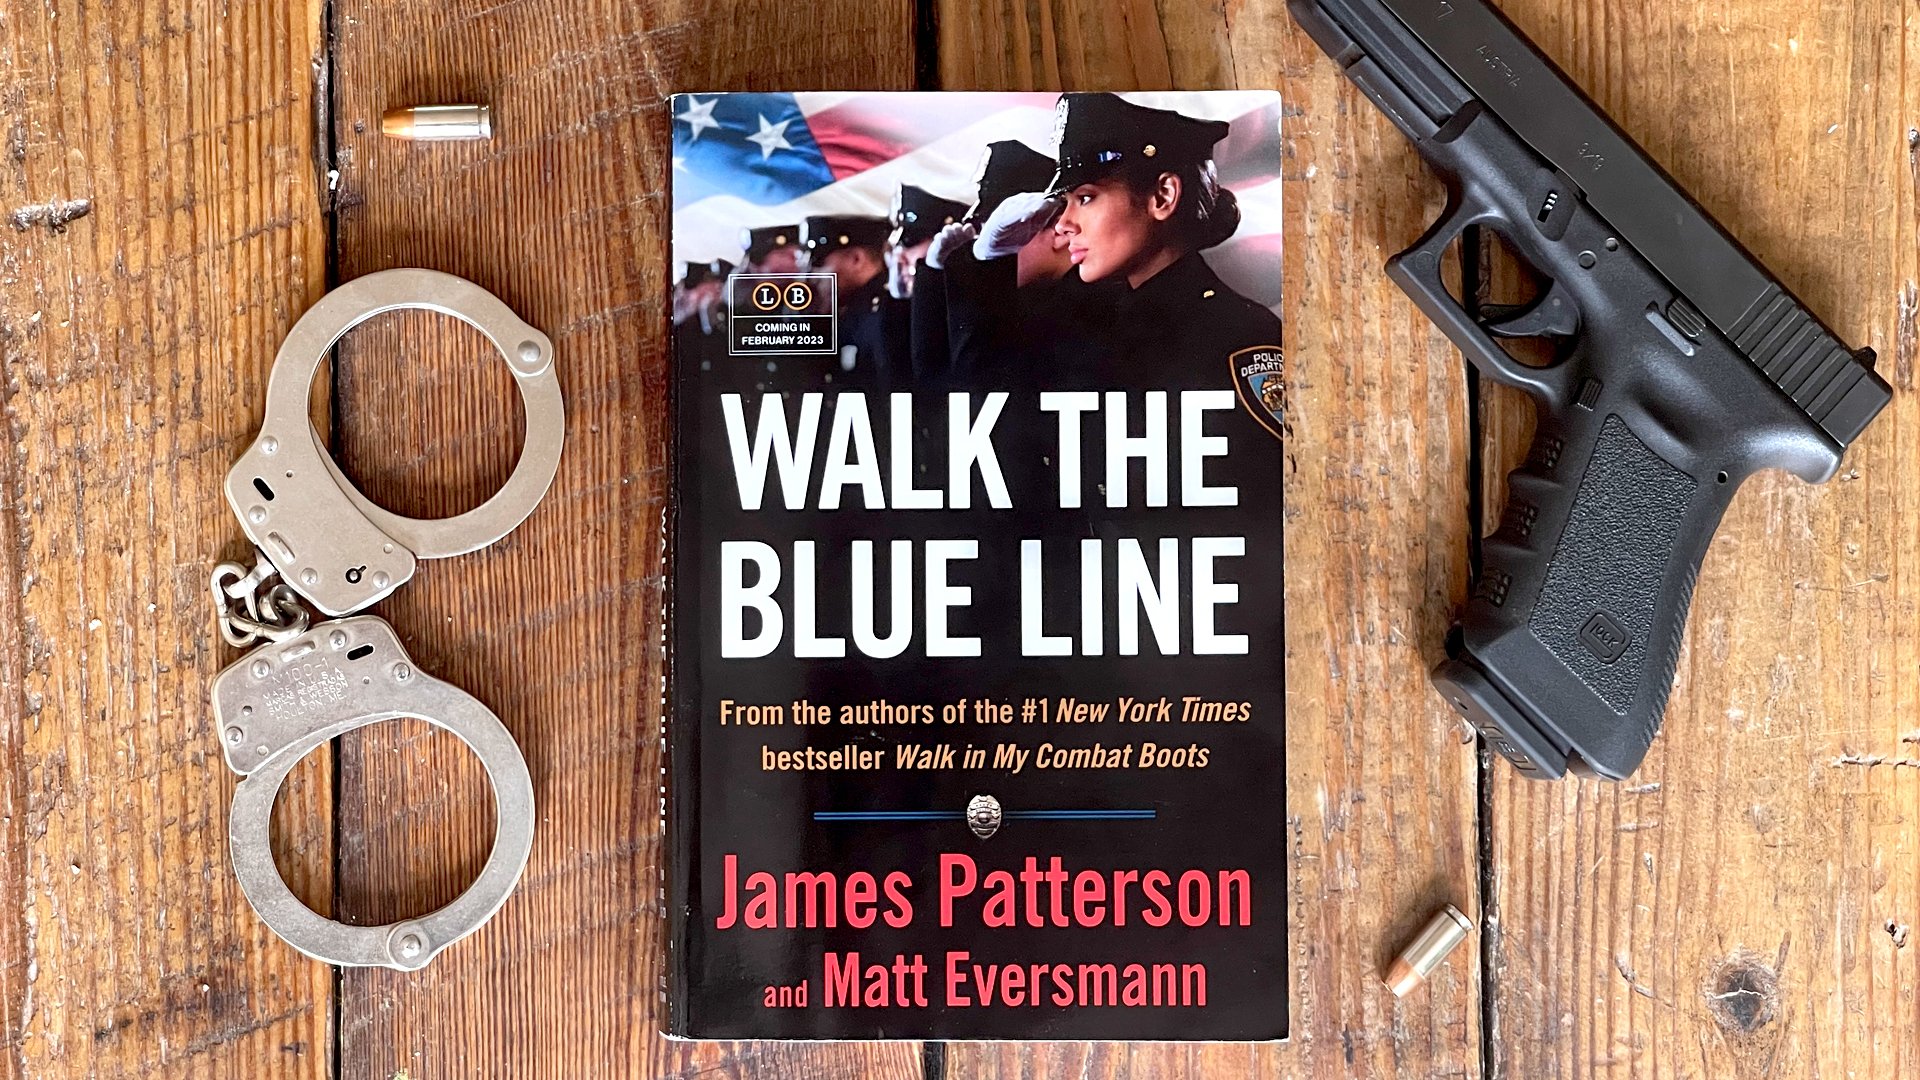 Walk The Blue Line is the third collaboration between James Patterson and Matt Eversmann. Photo by Mac Caltrider/Coffee or Die Magazine.